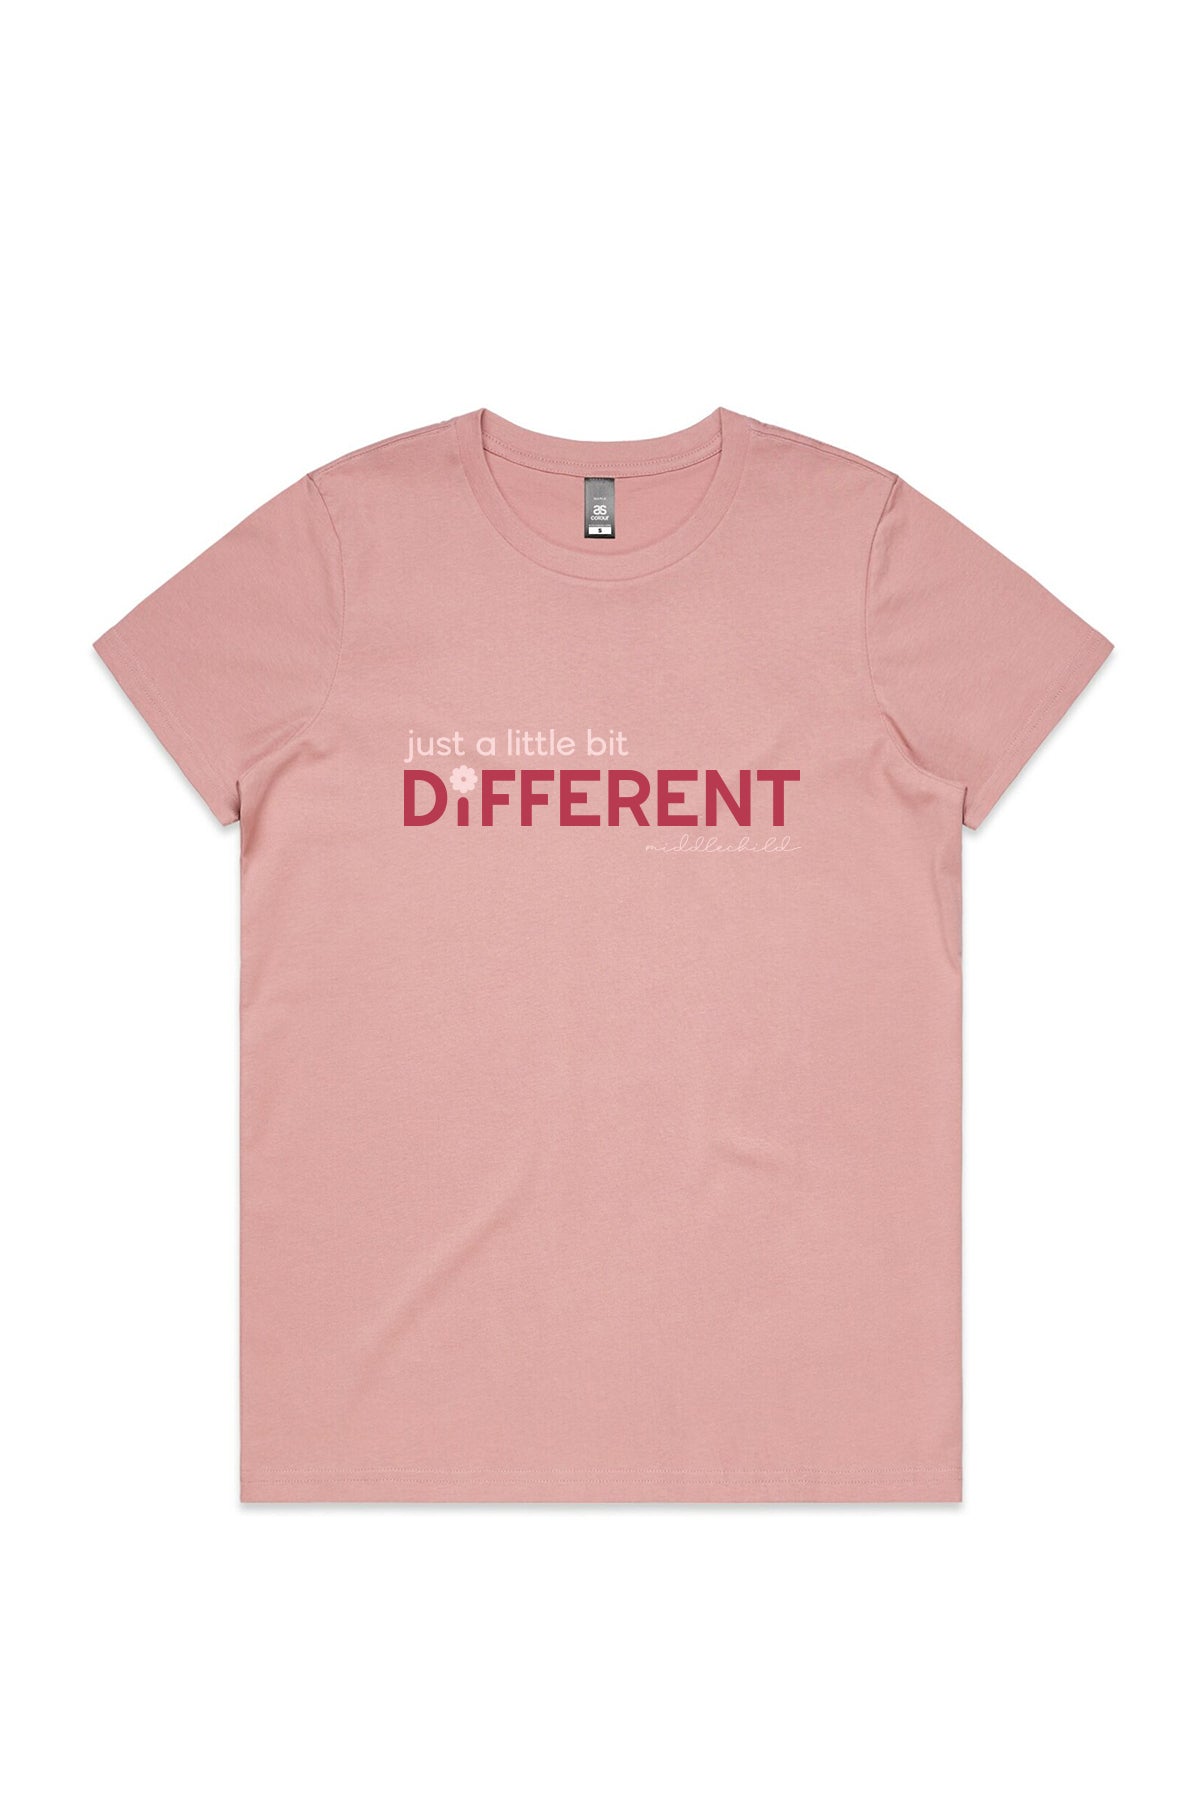 A rose pink coloured t-shirt is pictured flat against a white background. The t-shirt has the words just a little bit different written across the chest in a light pink and bright pink colour, with a daisy shape replacing the dot in the i. 